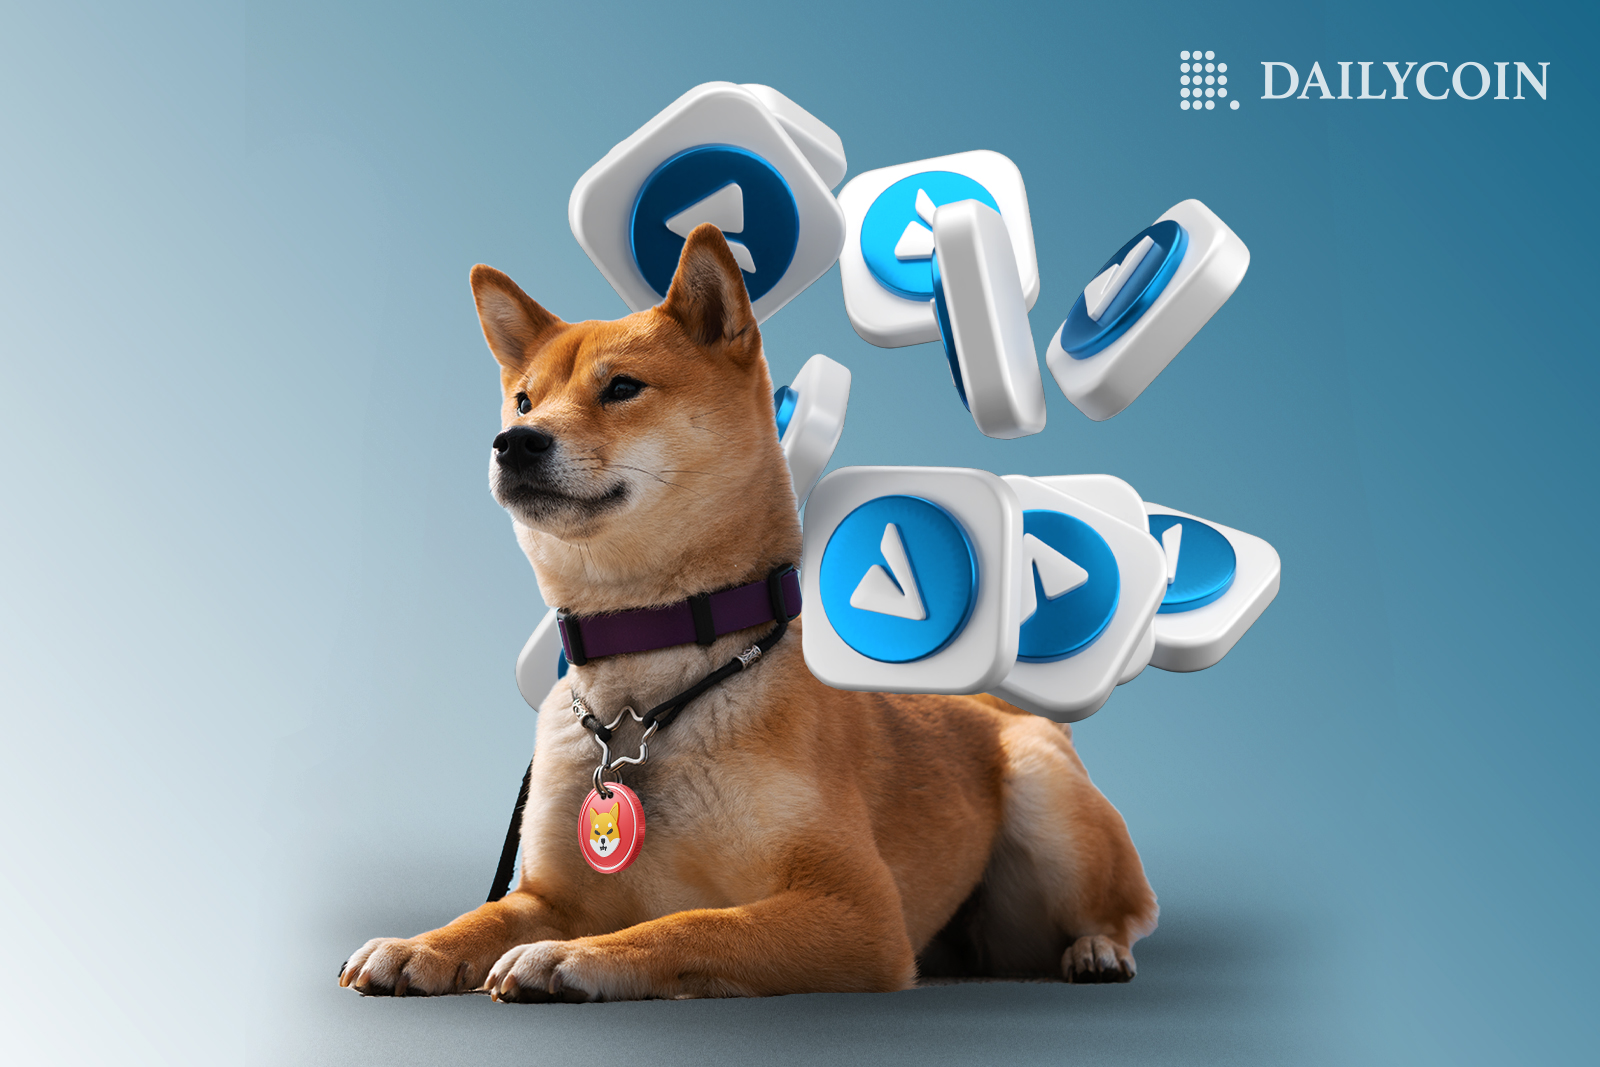 Shiba Inu dog with a Shiba Inu pendant on all fours as 7 Telegram app icons float around.